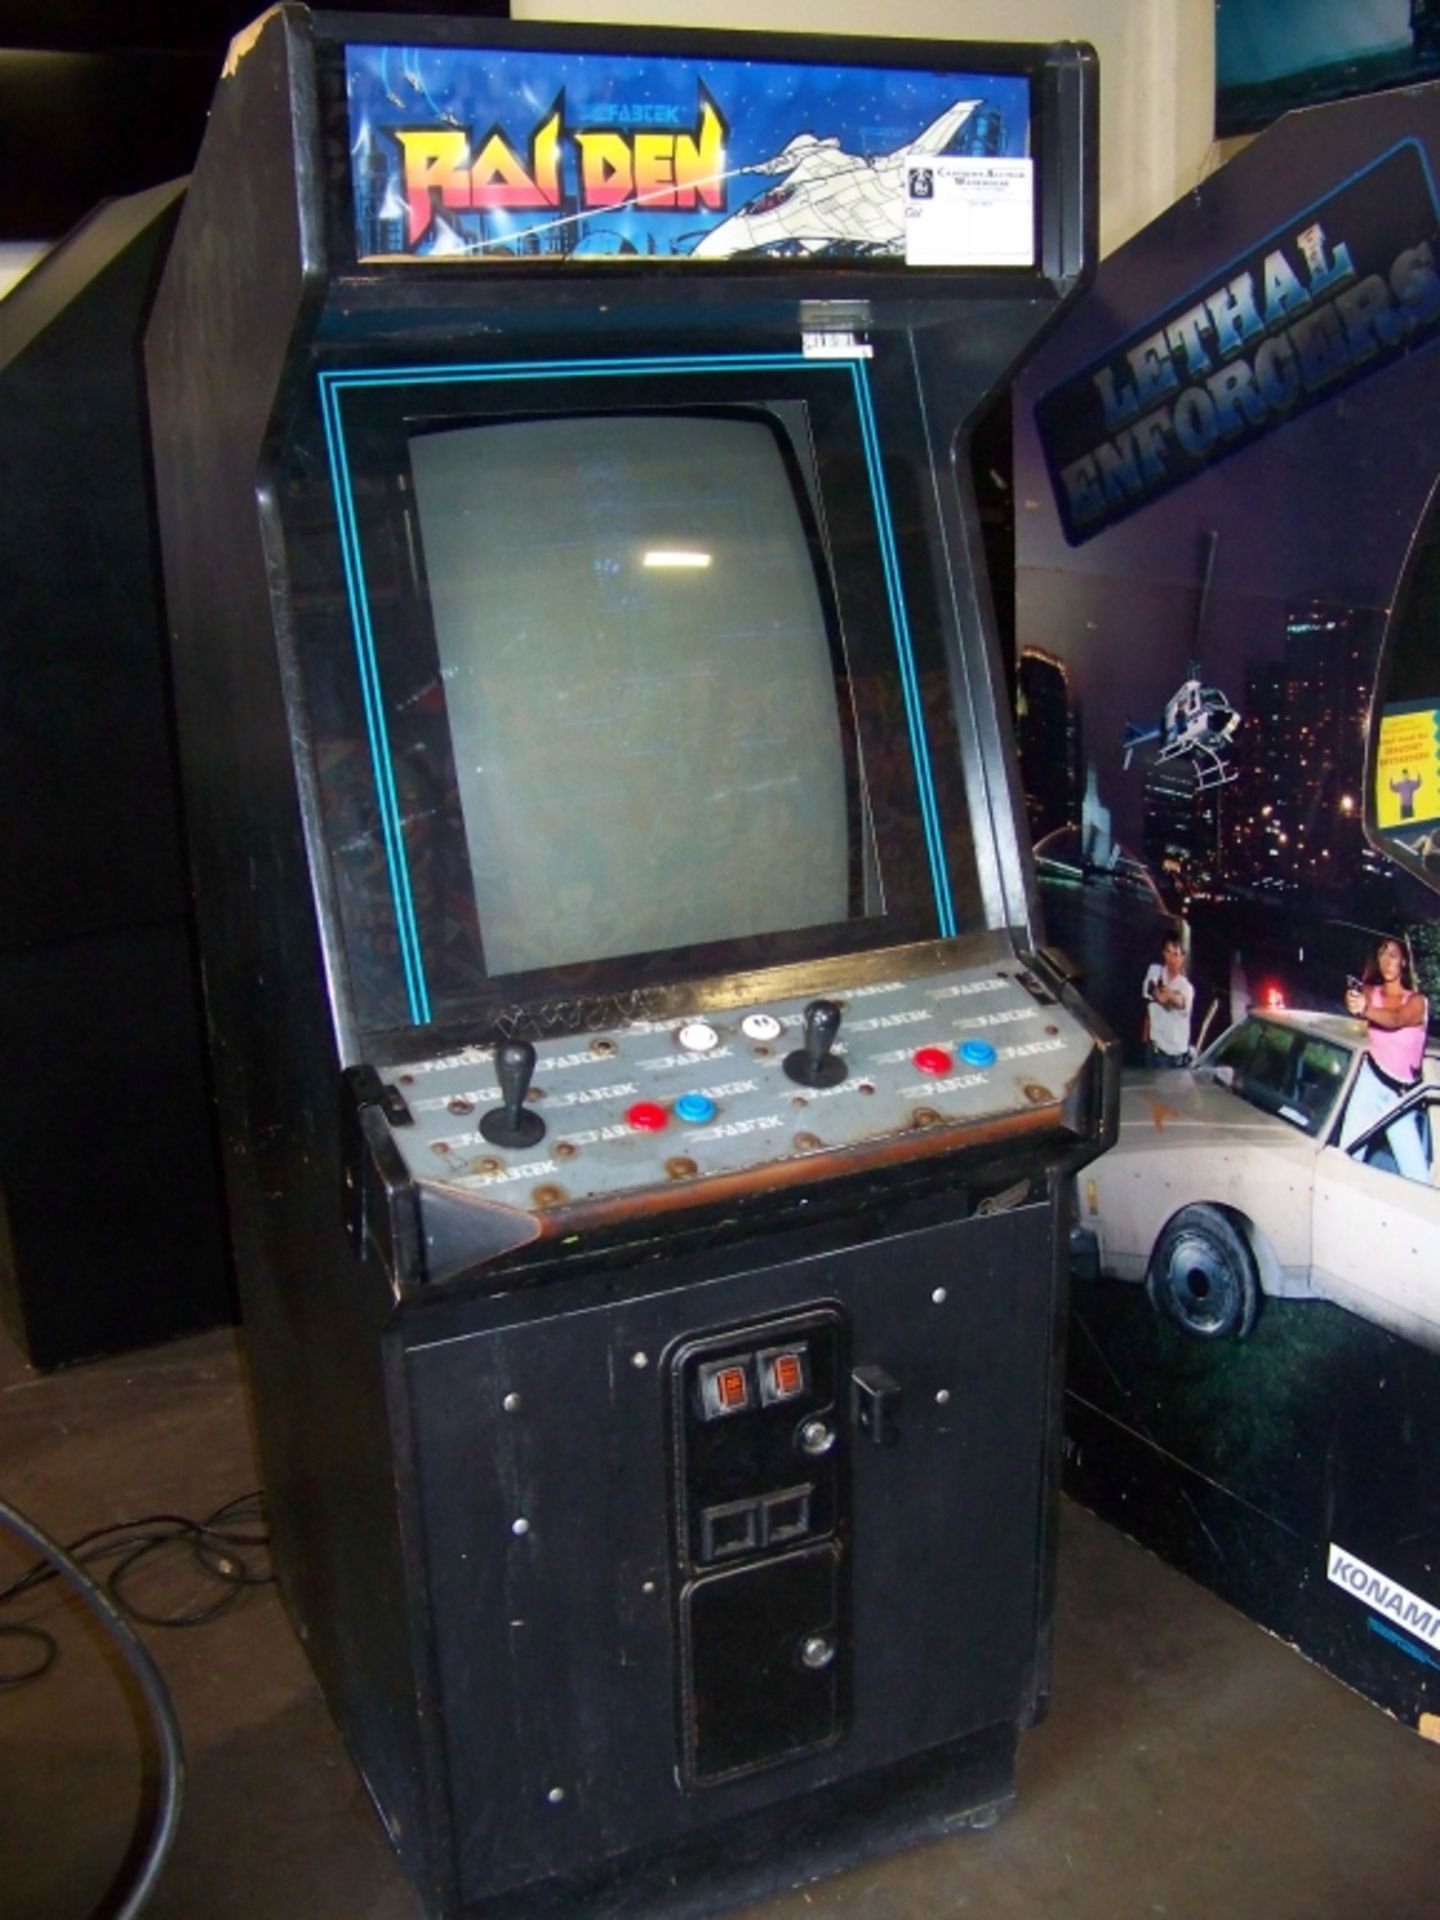 RAIDEN UPRIGHT VERTICAL SHOOTER ARCADE GAME - Image 4 of 4